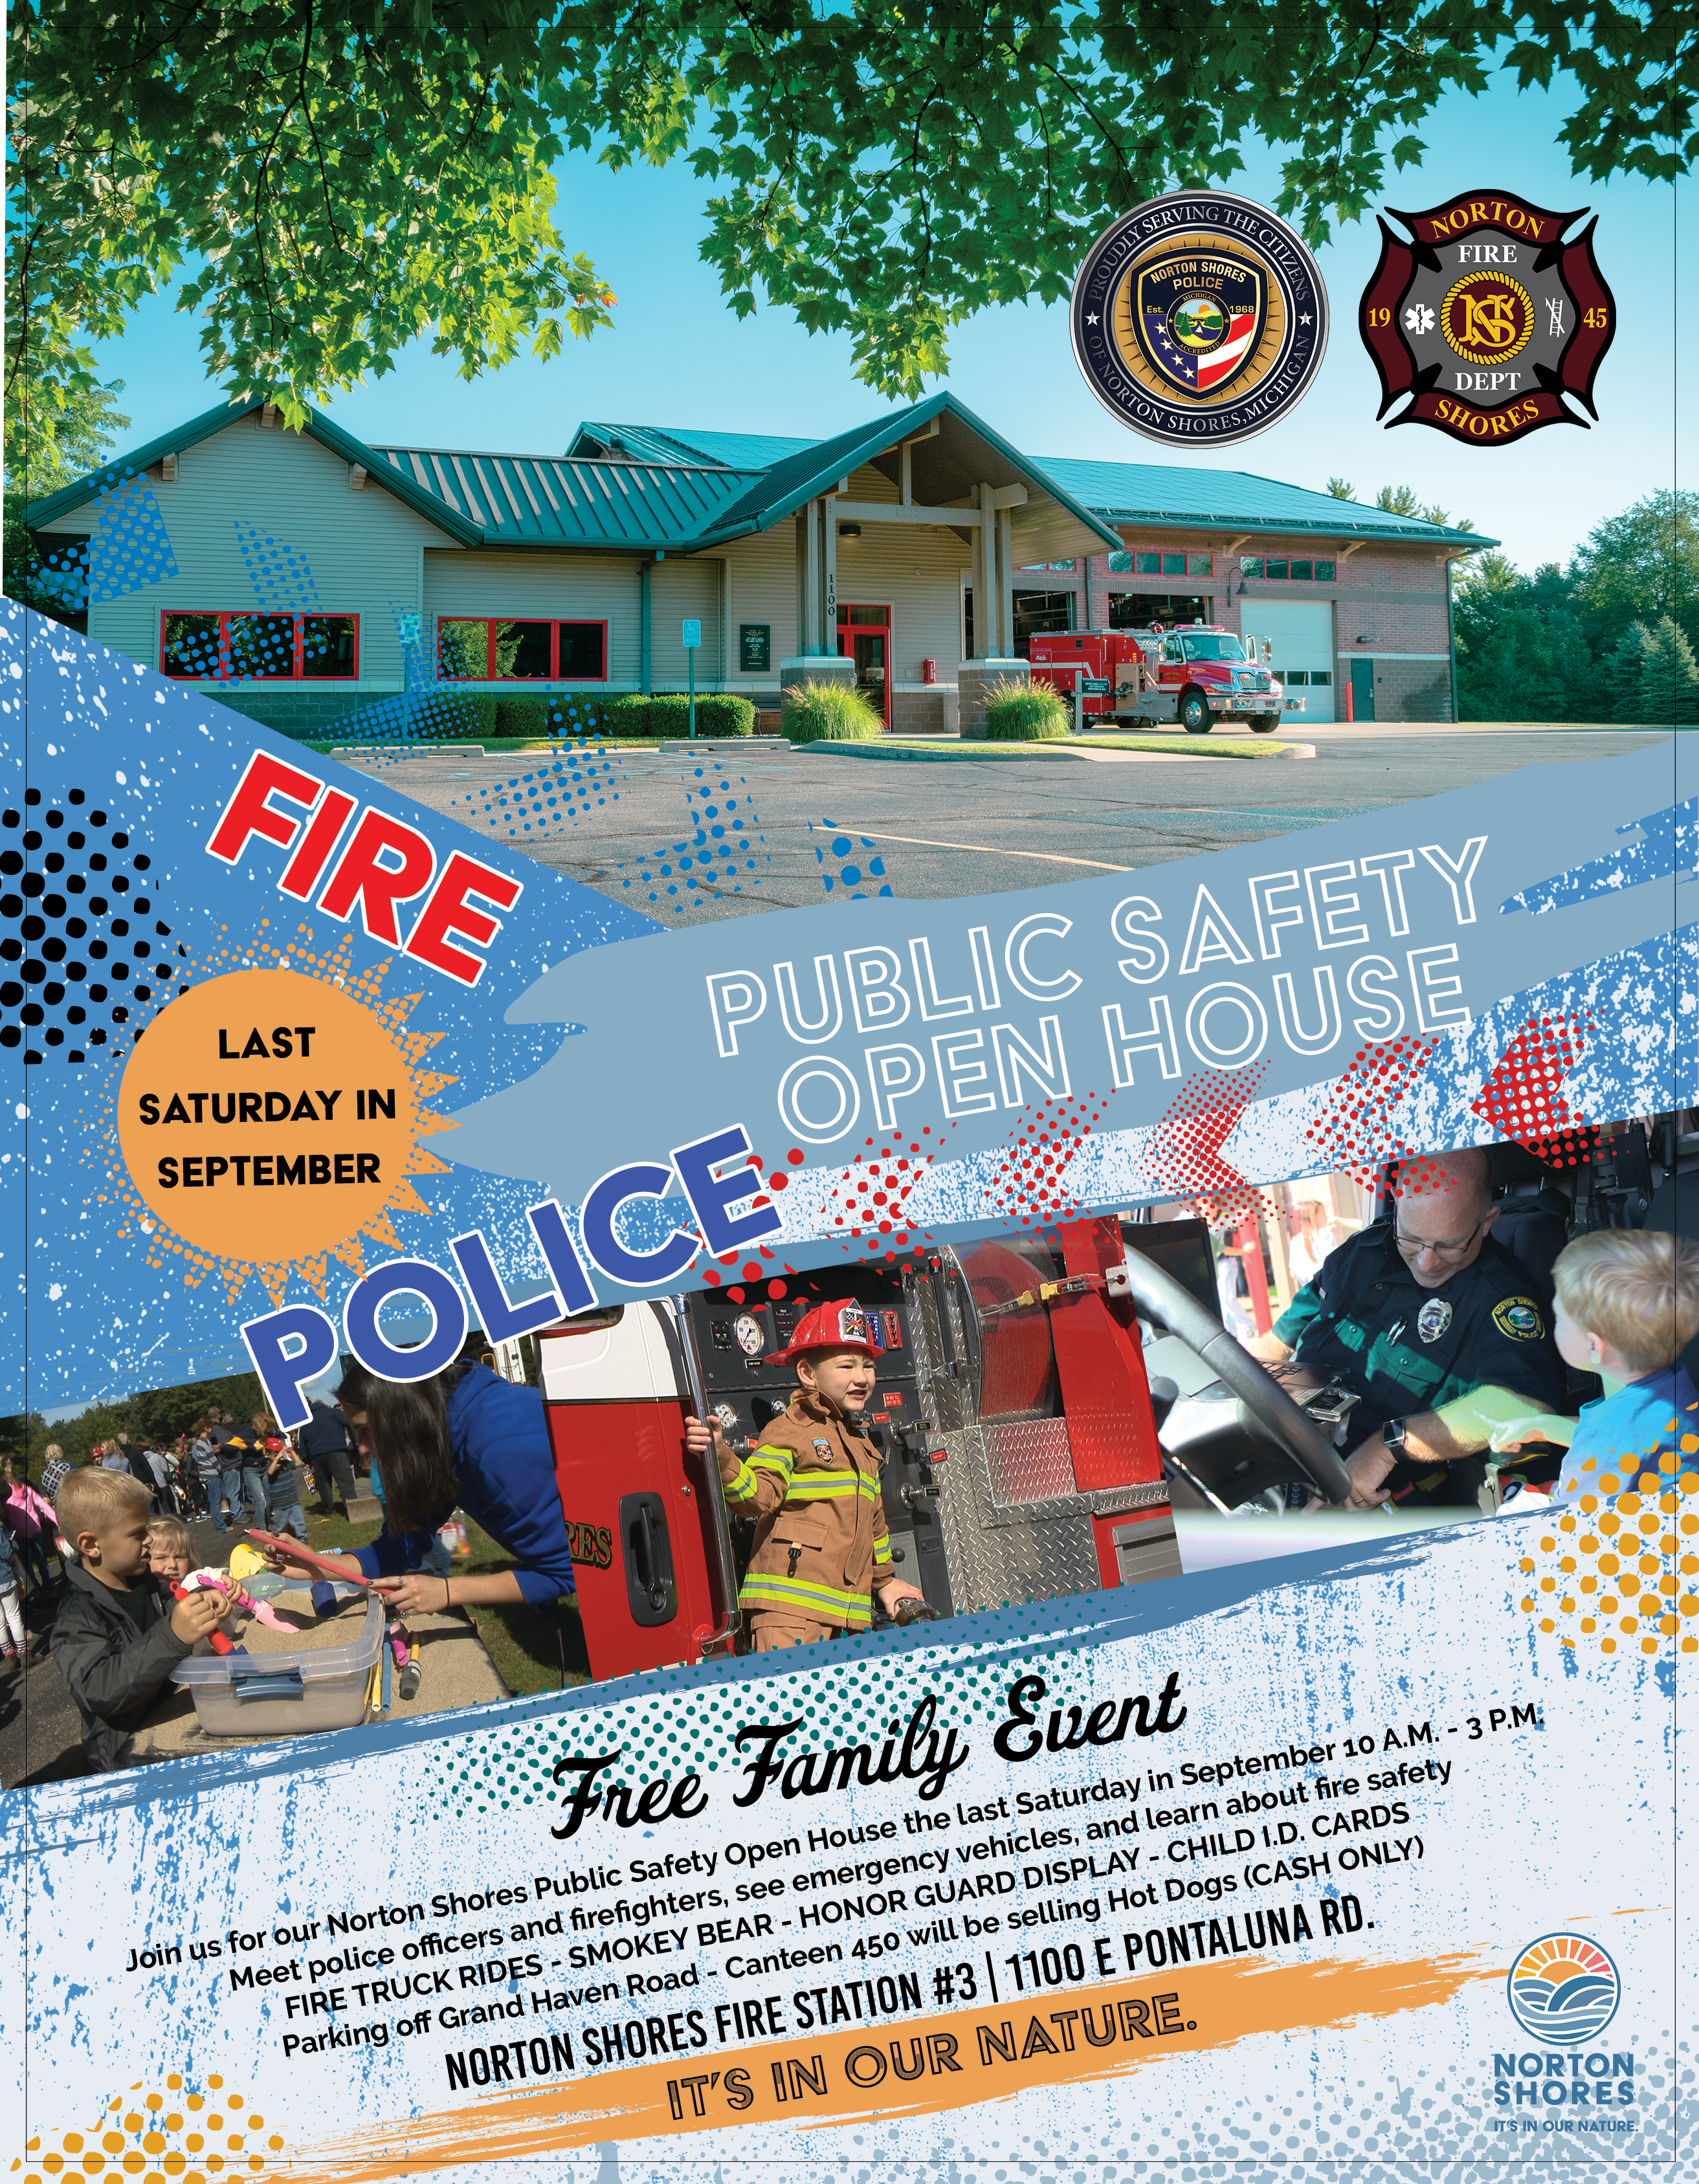 Public Safety Open House FIRE POLICE Last Saturday in September